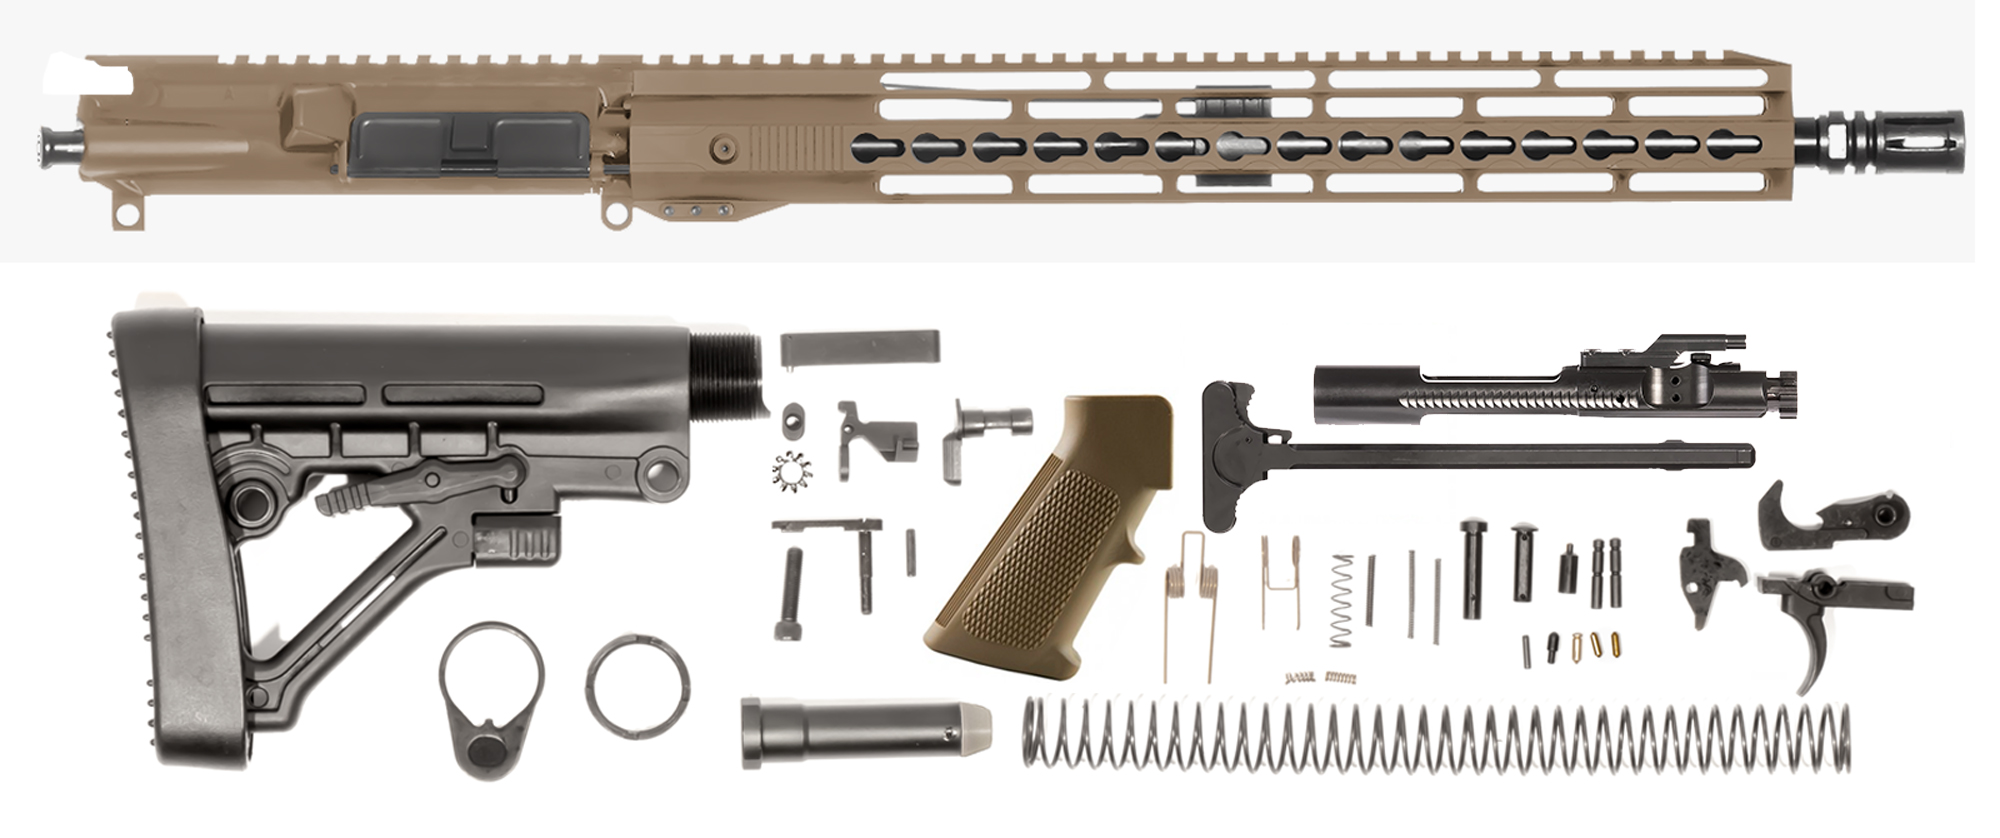 sportsman-guide-16″-5-56-nato-18-15″-unmarked-keymod-bolt-carrier-group-charging-handle-ar-15-buttstock-kit-ar-15-lower-parts-kit-coyote-brown